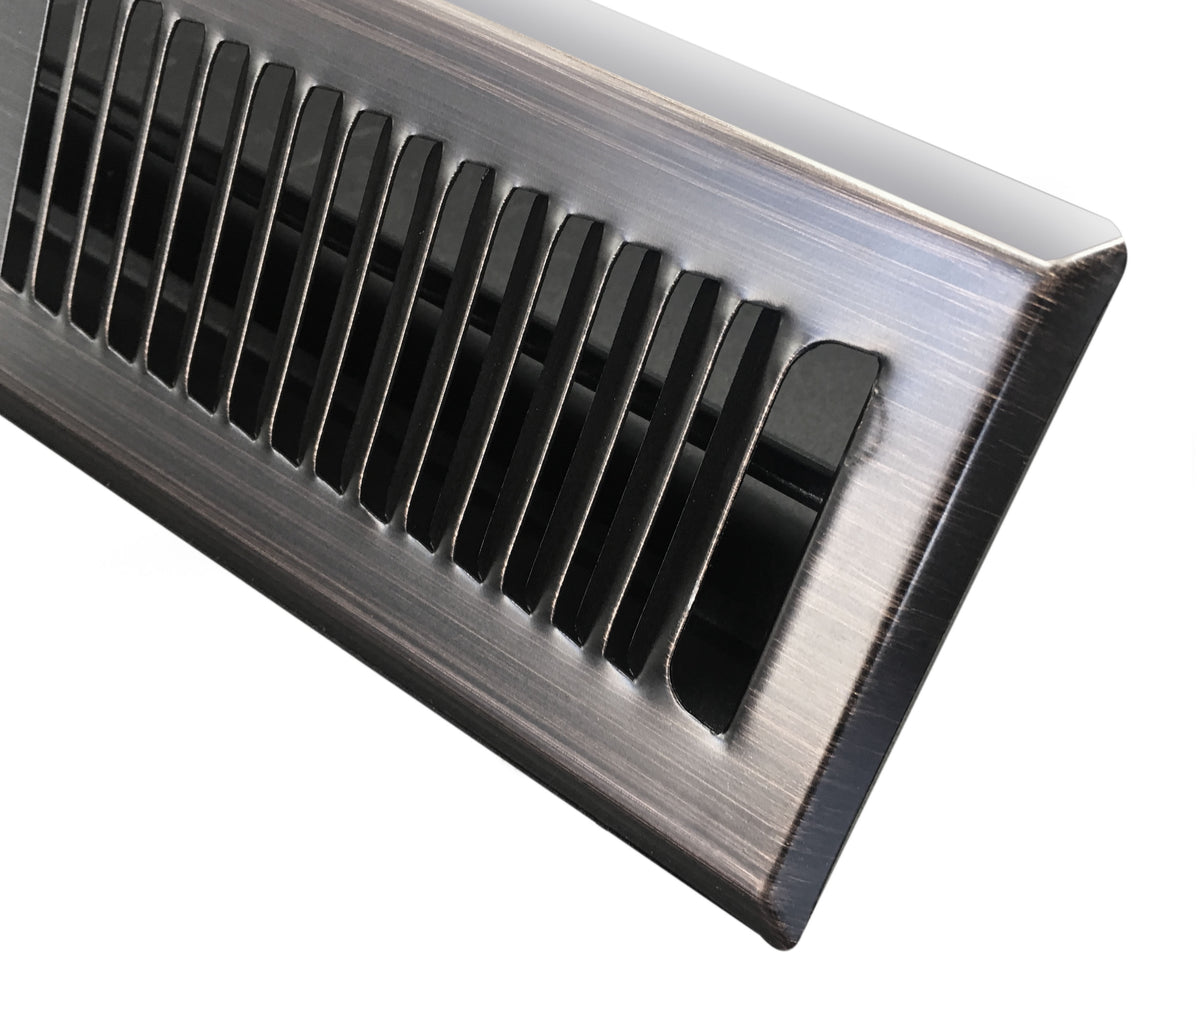 4&quot; X 10&quot; Modern Floor Register Grille With Dampers- Contempo Slotted Grate - HVAC Vent Duct Cover - Matte Black